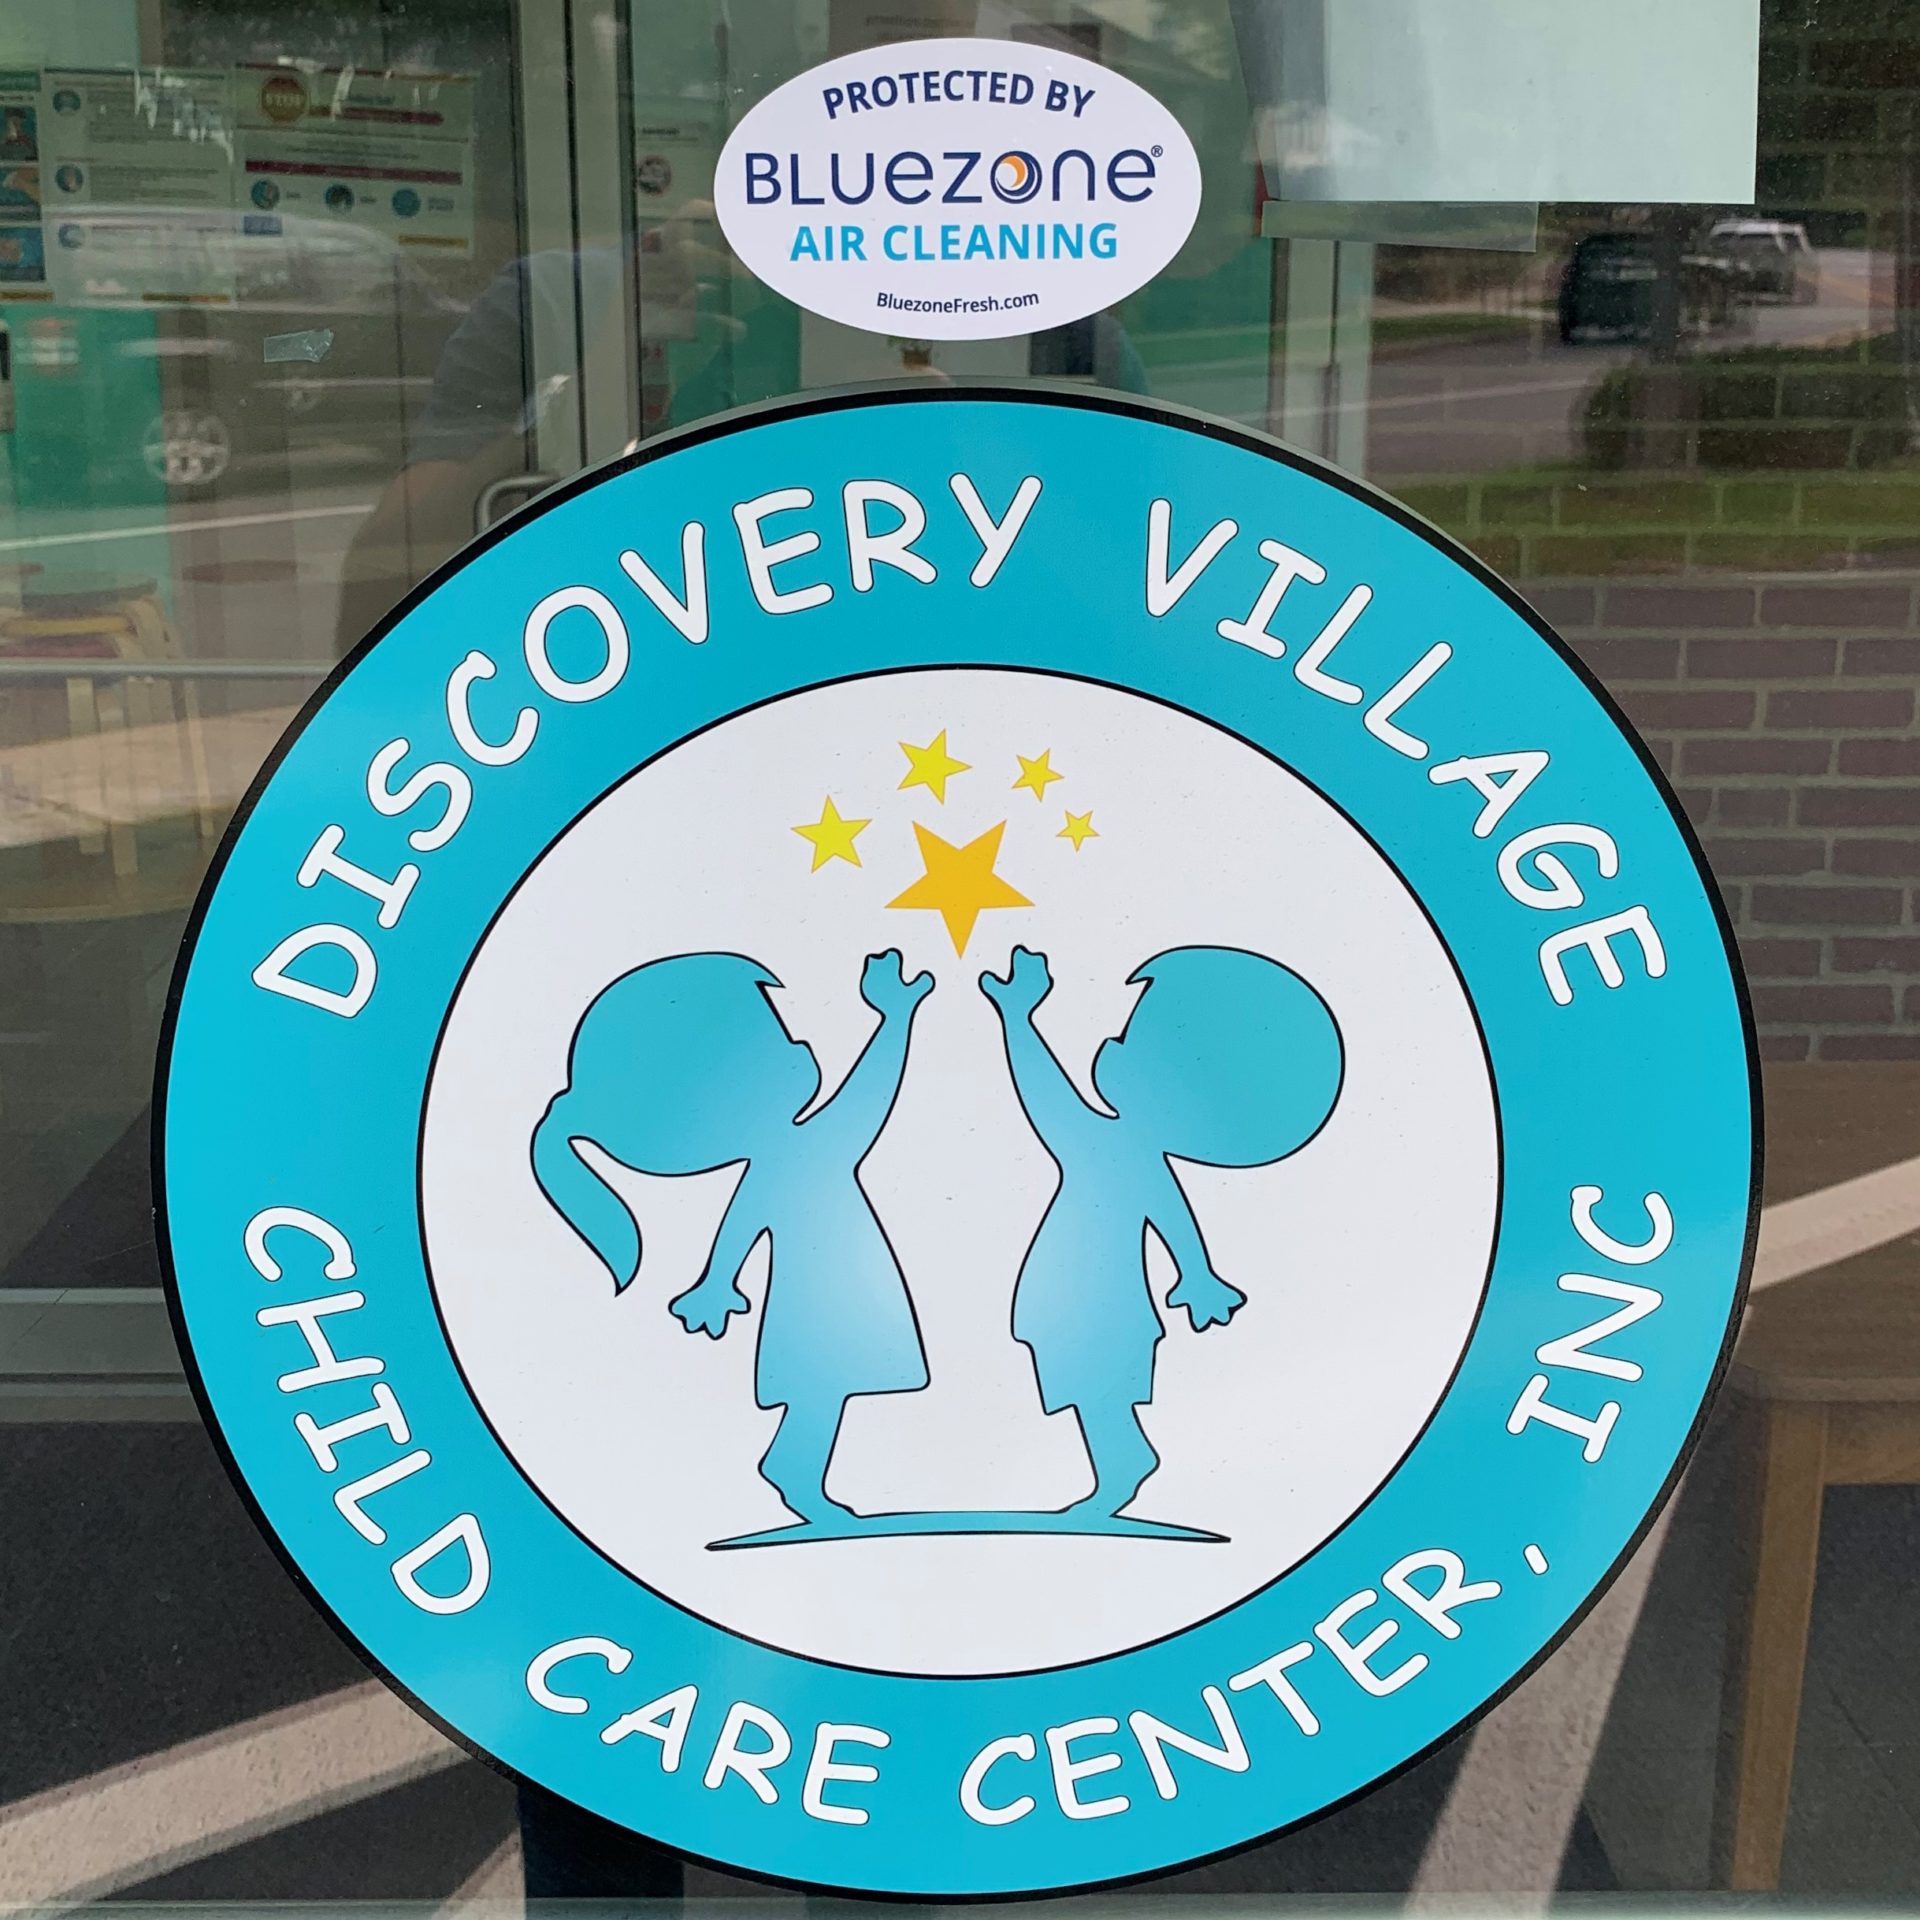 Bluezone air cleaner installed in DVCC - child care center